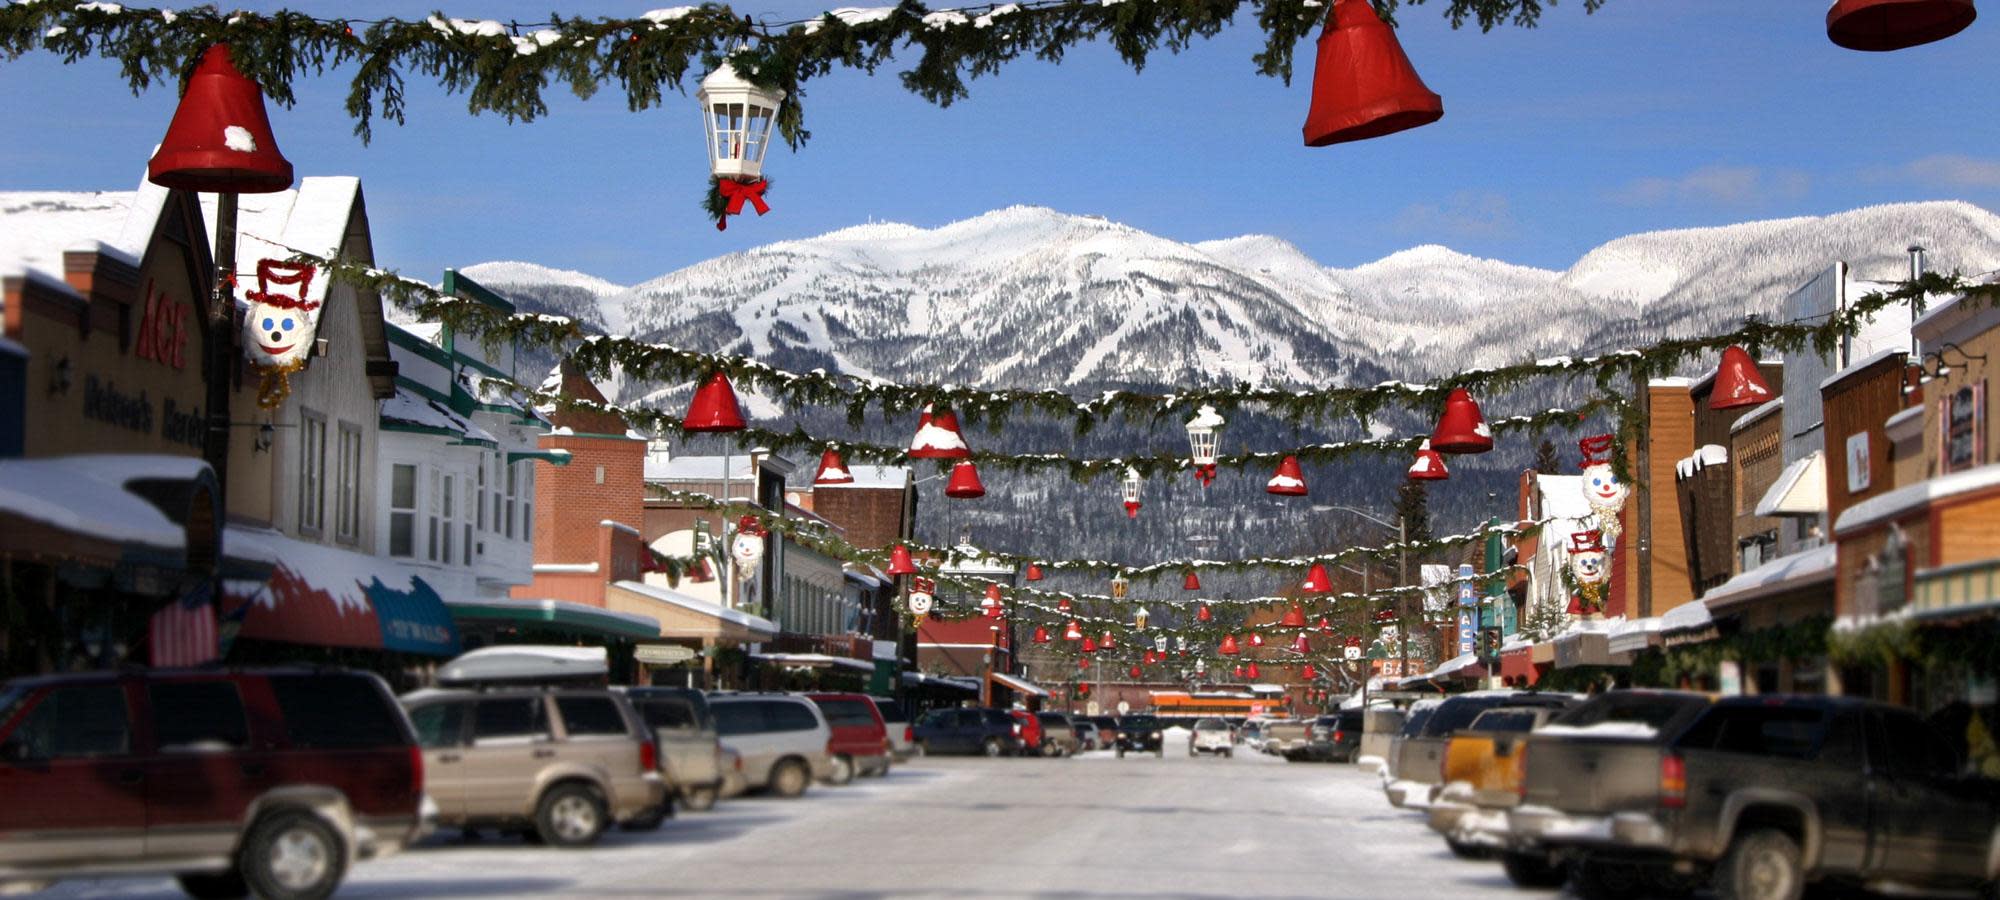 Best Places To Stay In Whitefish Montana